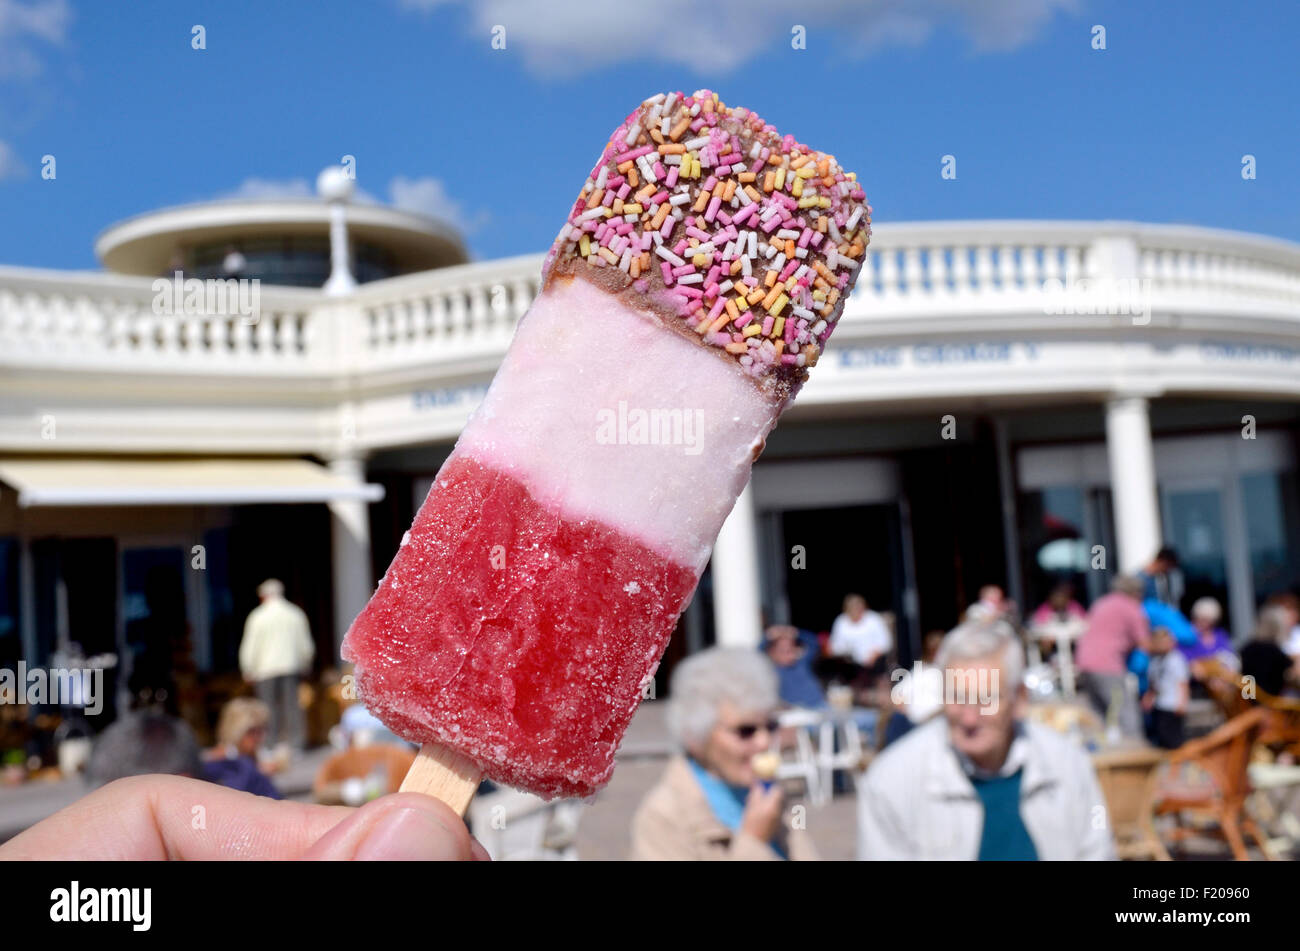 Strawberry ice lolly Fab à la mer. Bexhill-on-Sea, East Sussex, Angleterre, Royaume-Uni. Banque D'Images